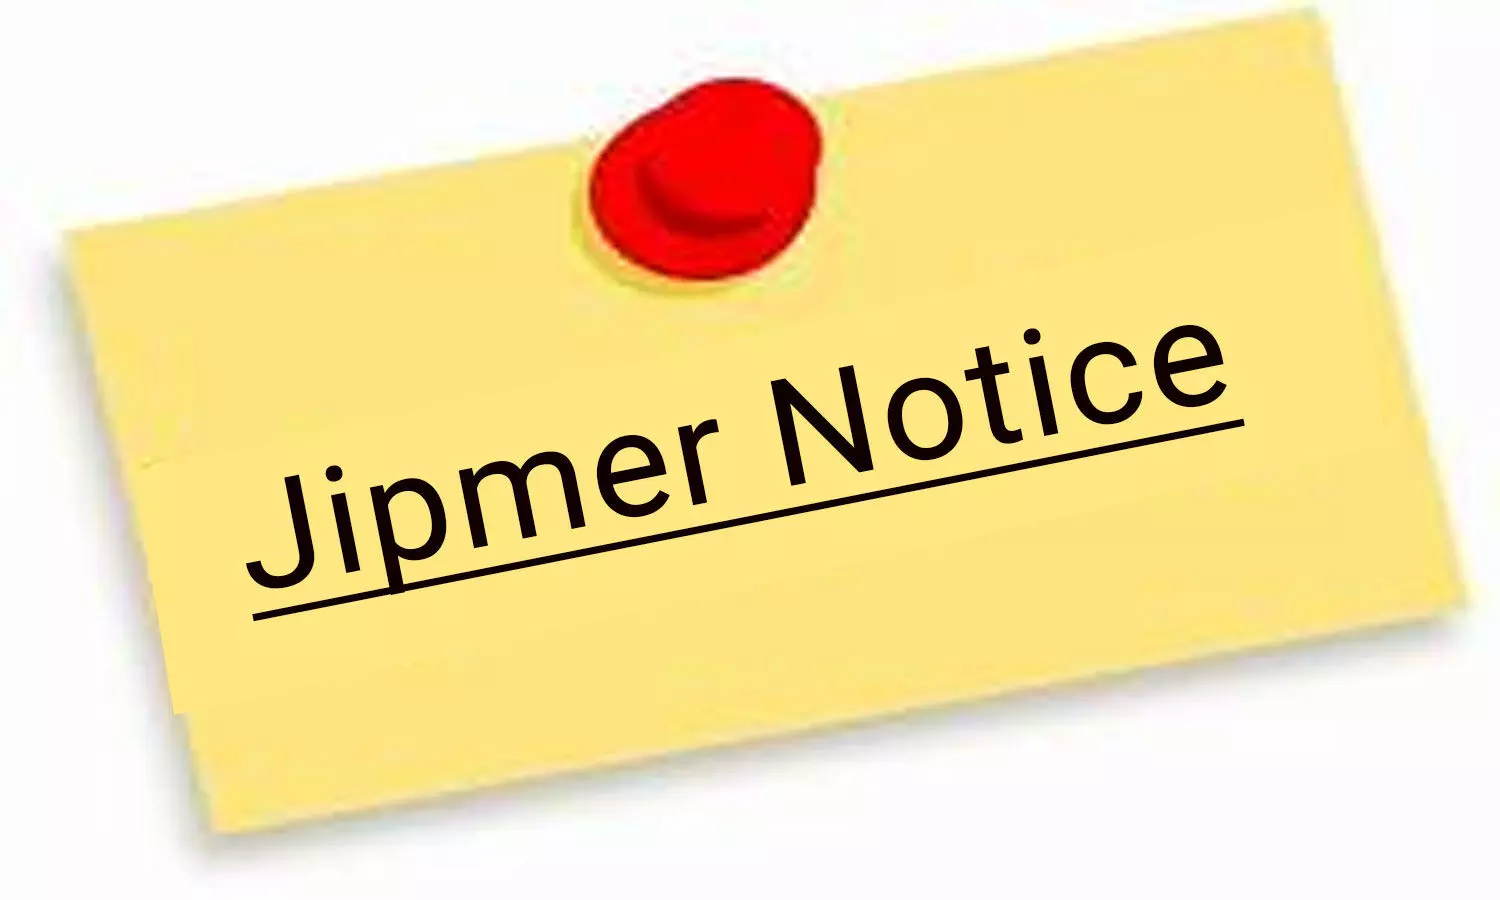 JIPMER invites applications for submission of proposals for September 2021